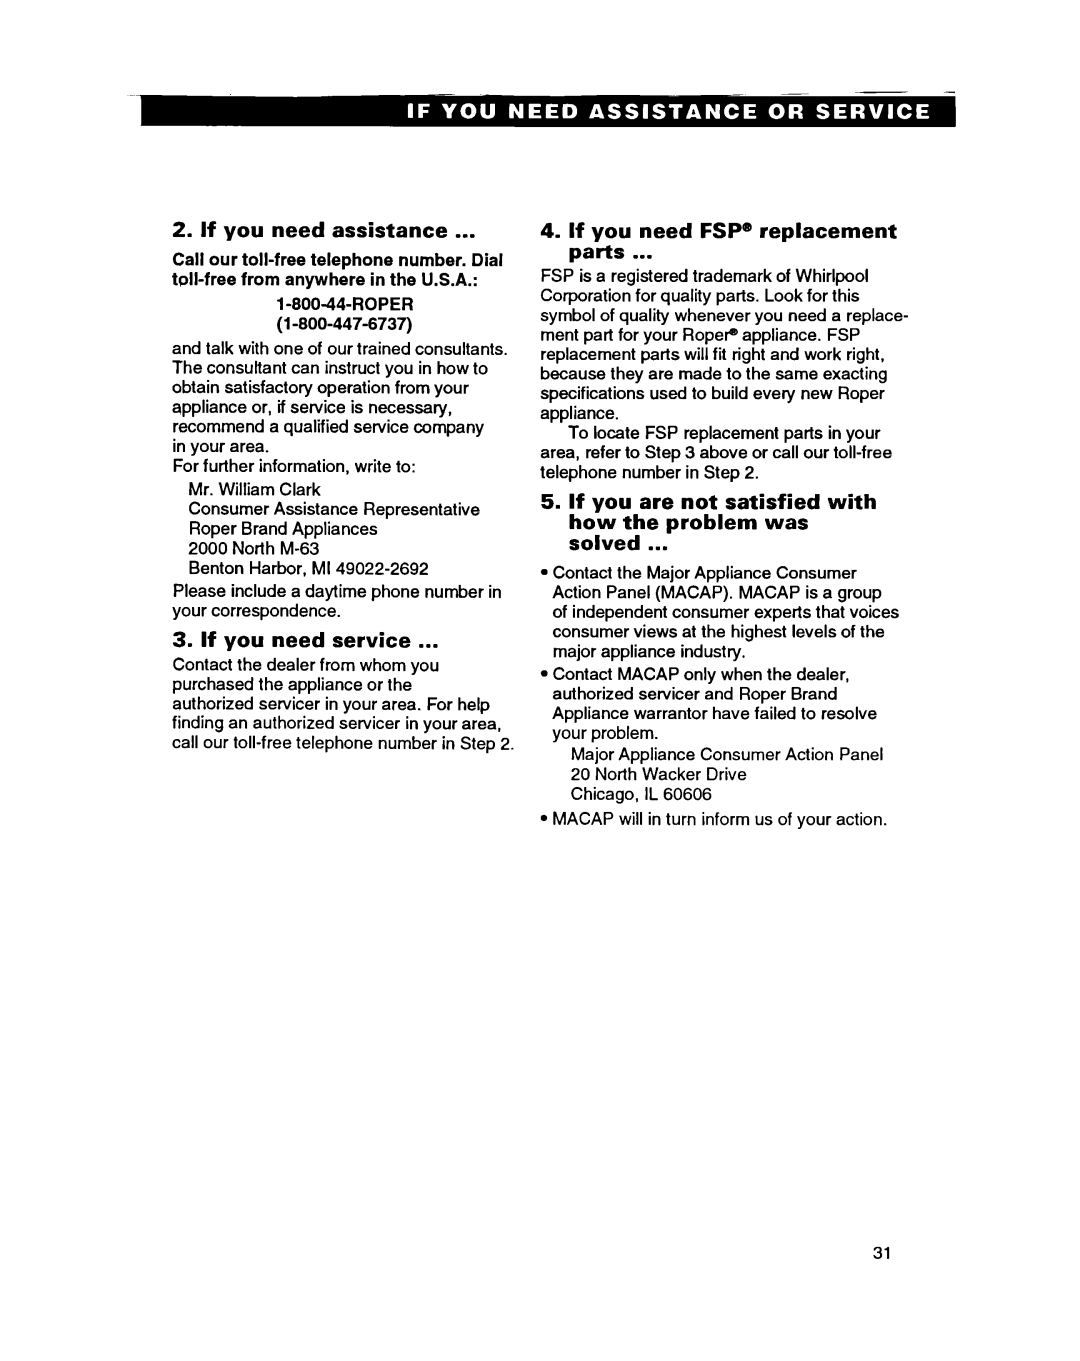 Roper FGS395B important safety instructions If you need assistance, If you need service, If you need FSP@ replacement parts 